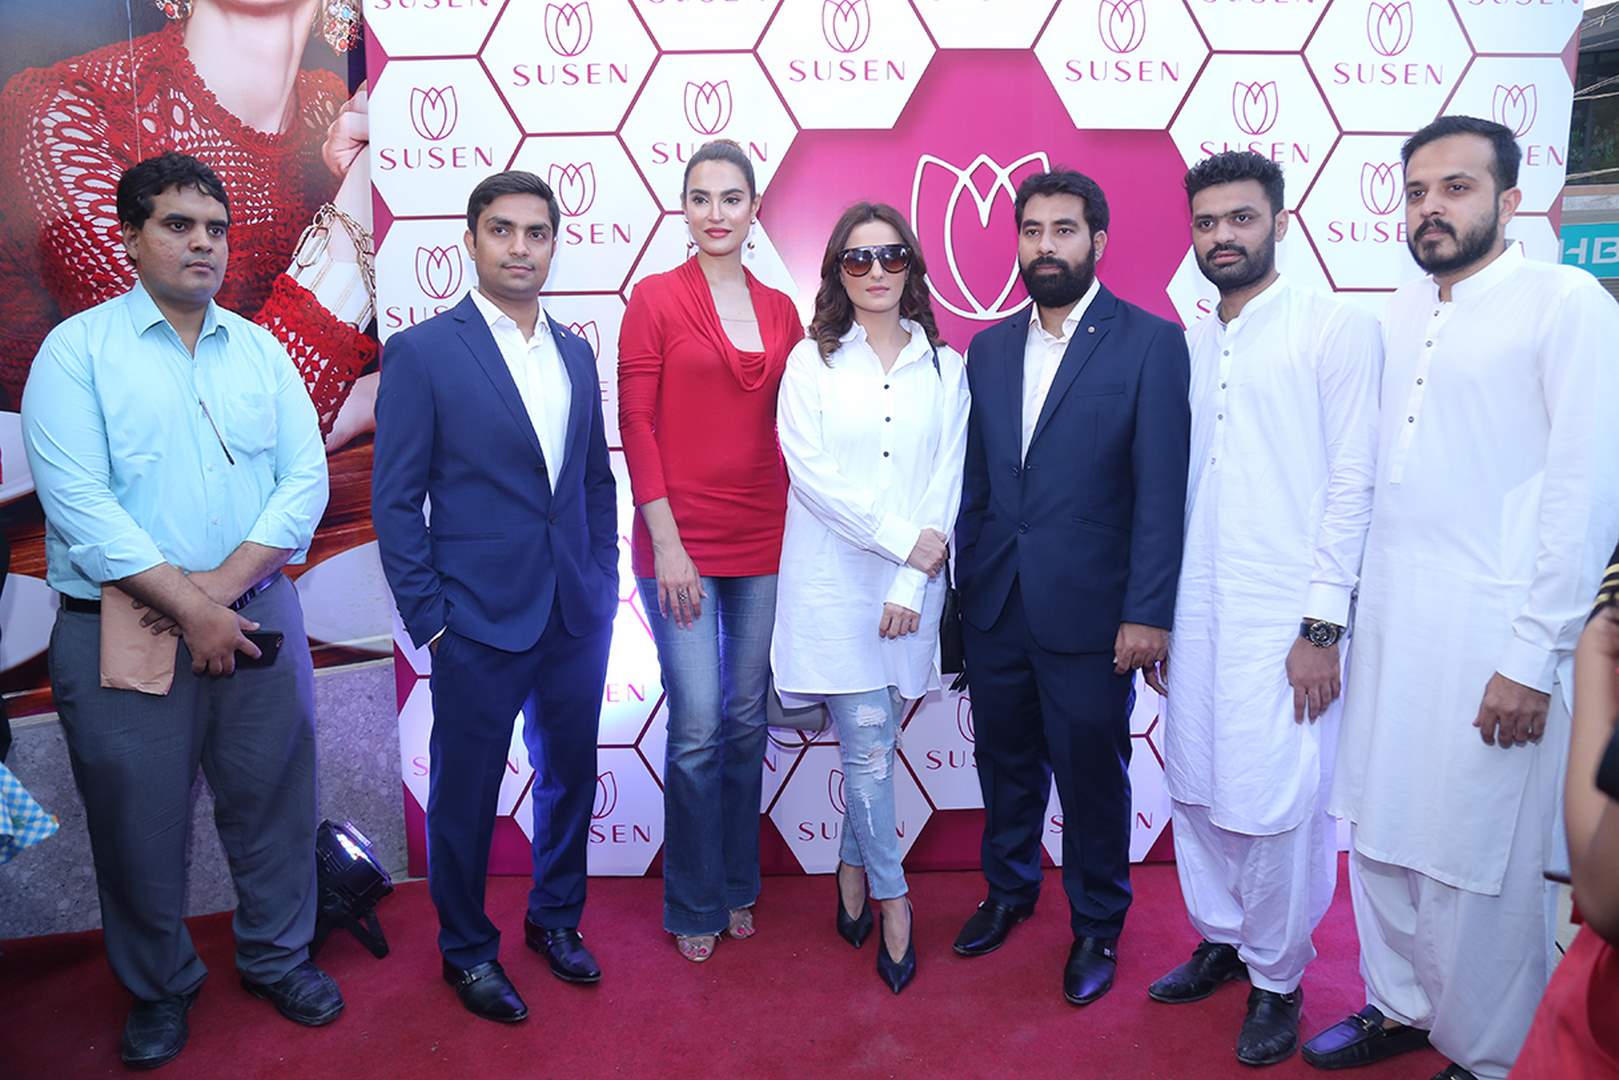 Momal Sheikh and Nadia Hussain along with others graced the red carpet